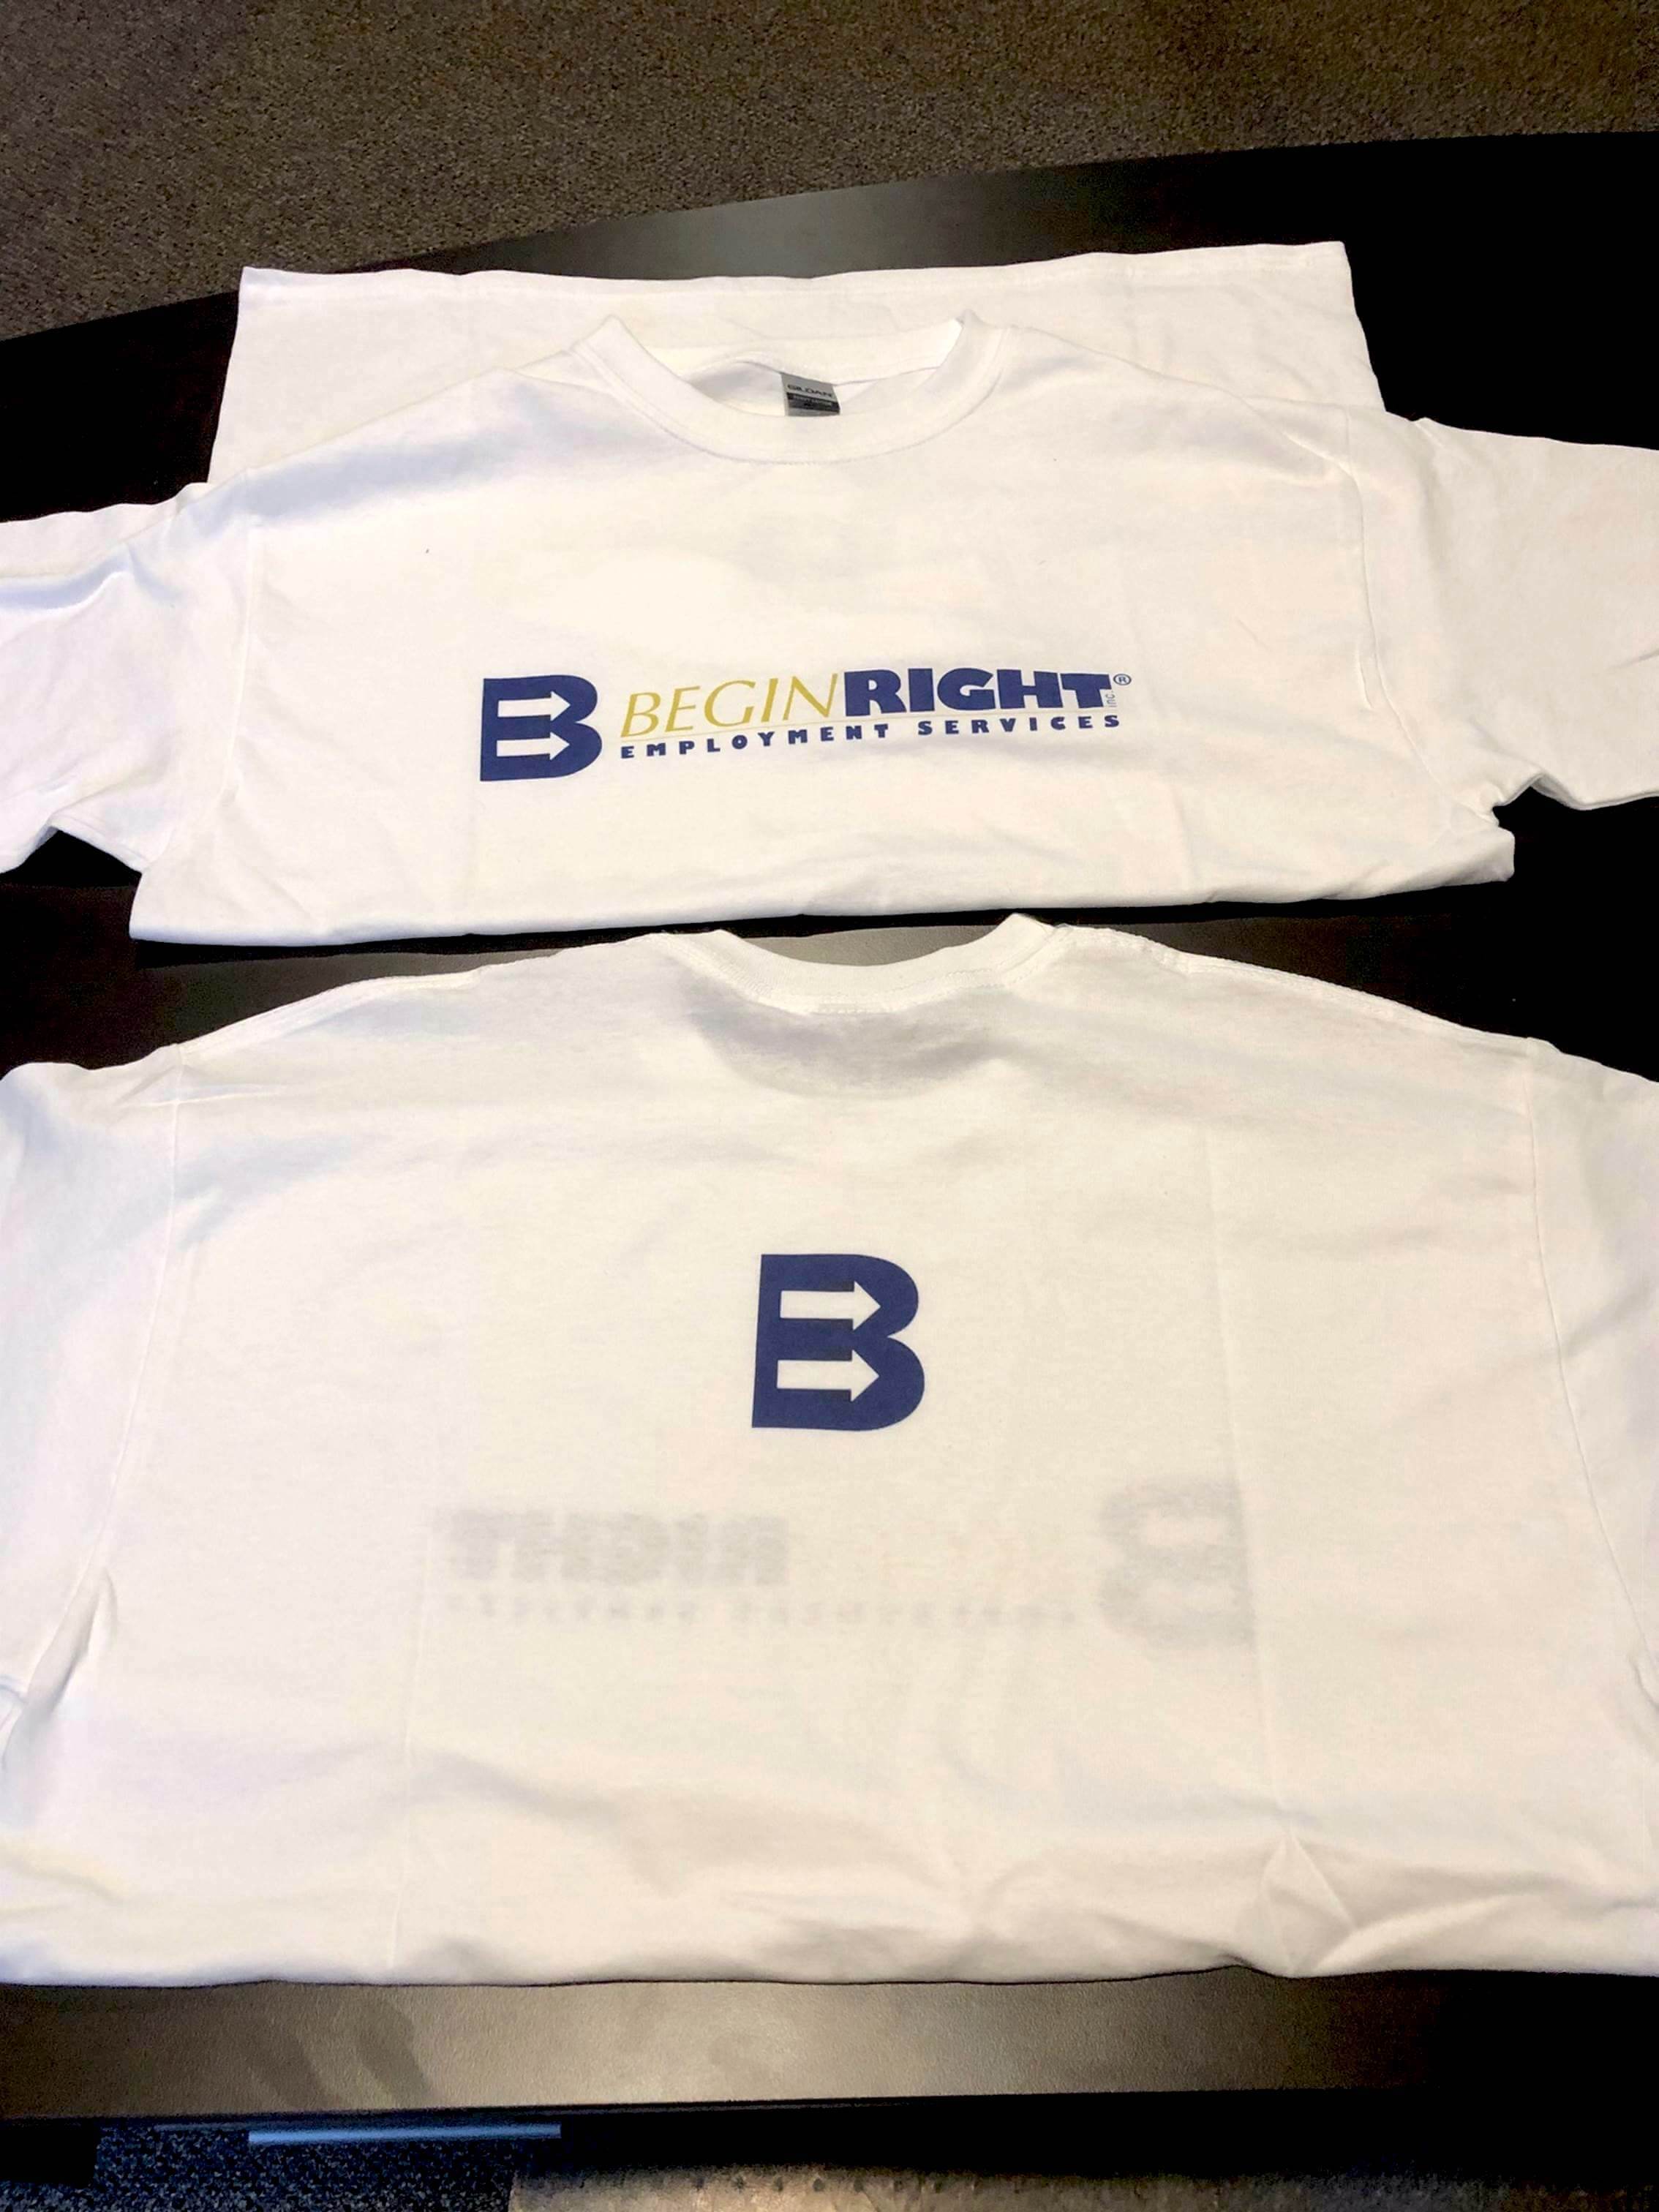 BeginRight Employment Services used its Roland DG BT-12 direct-to-garment printer to print its logo on T-shirts and other apparel.